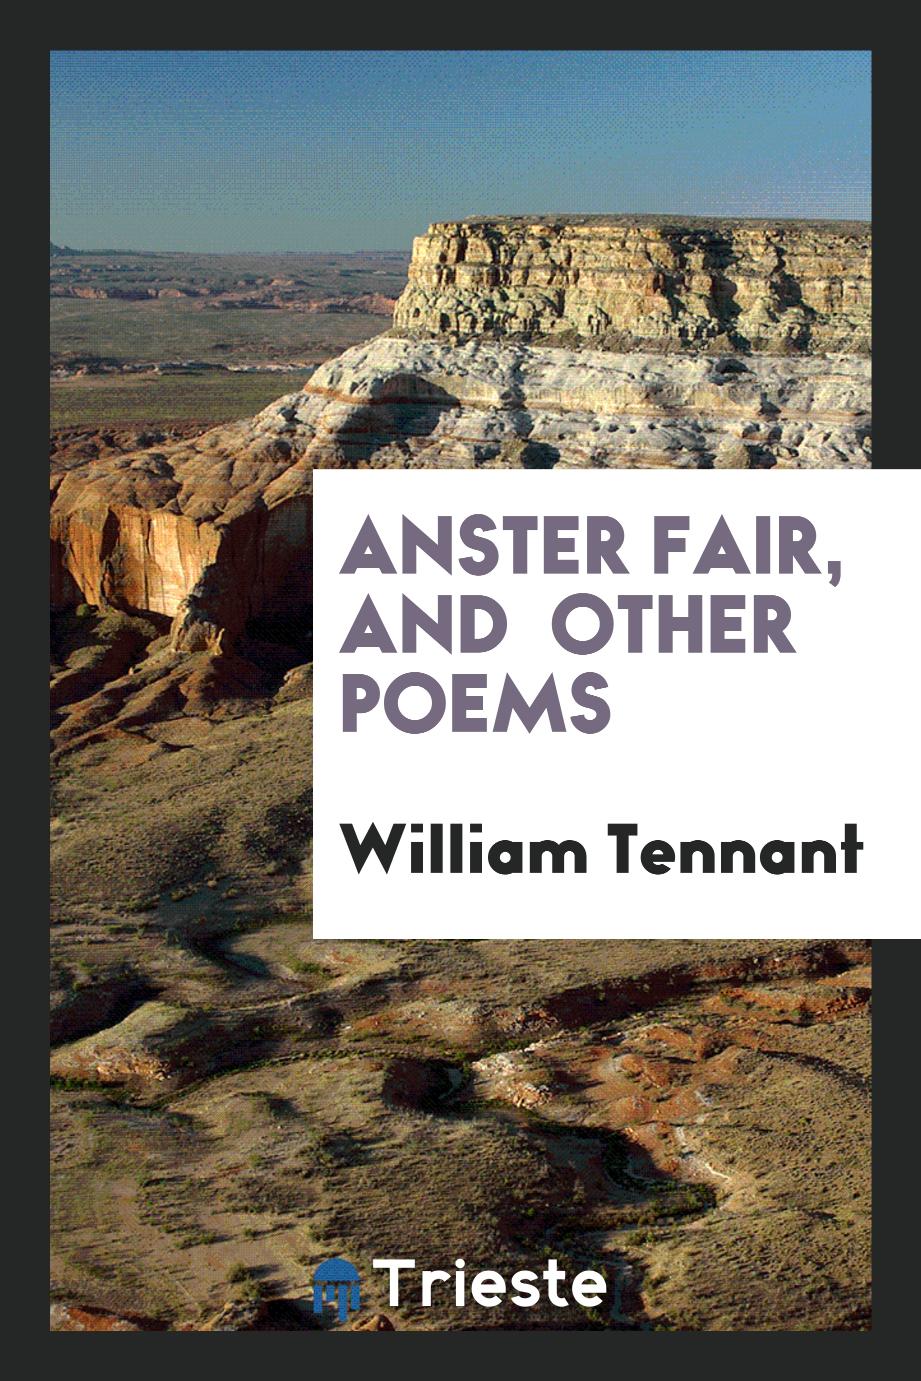 Anster fair, and other poems